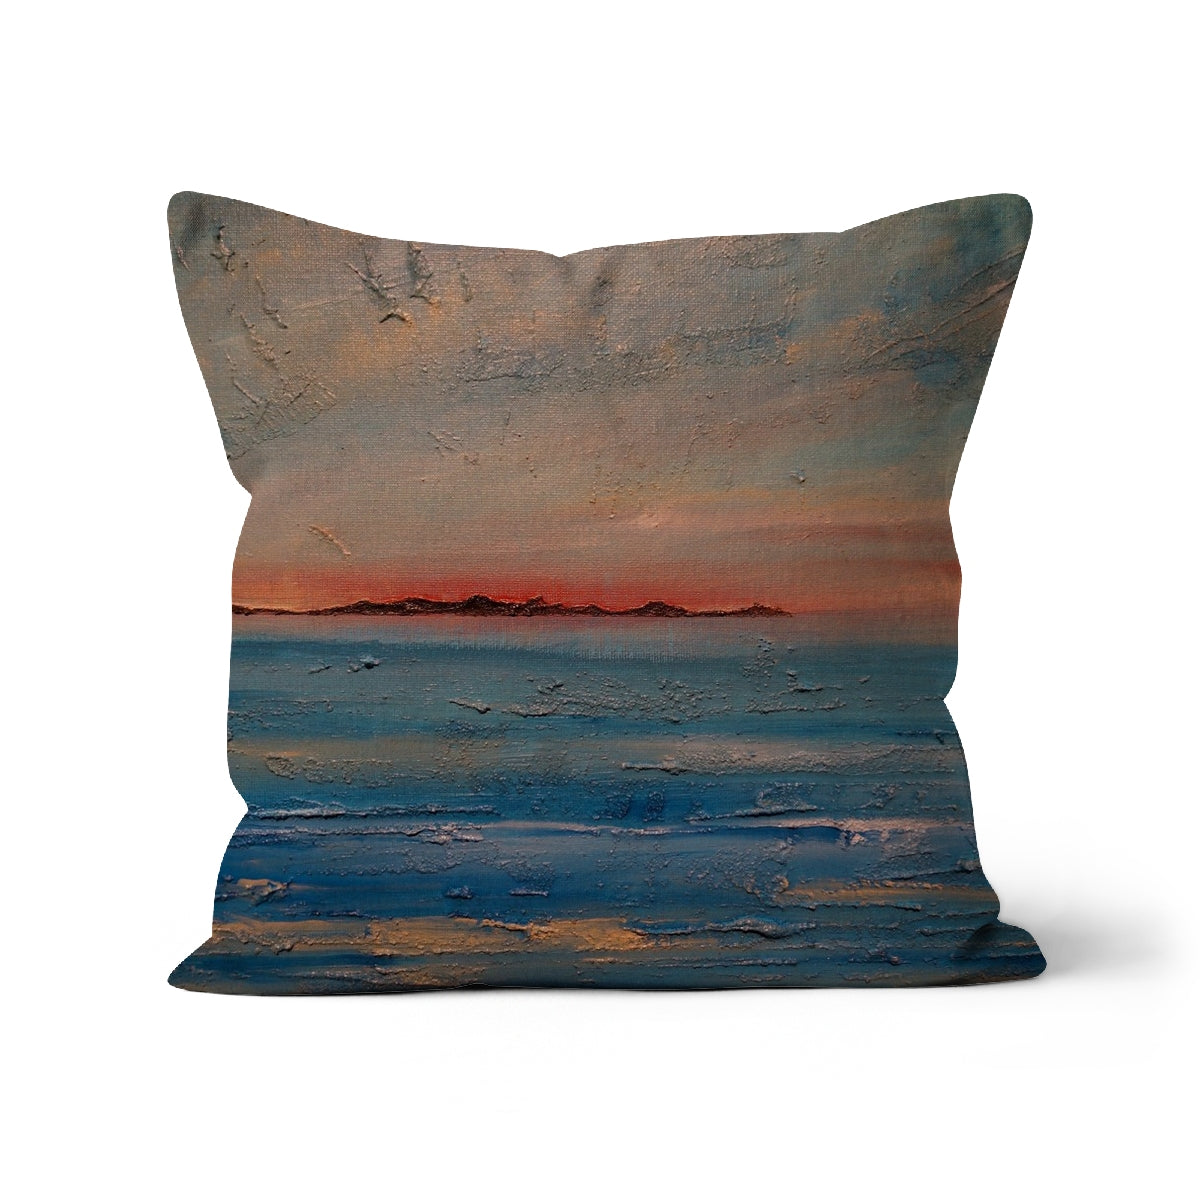 Gigha Sunset Art Gifts Cushion-Cushions-Hebridean Islands Art Gallery-Faux Suede-22"x22"-Paintings, Prints, Homeware, Art Gifts From Scotland By Scottish Artist Kevin Hunter